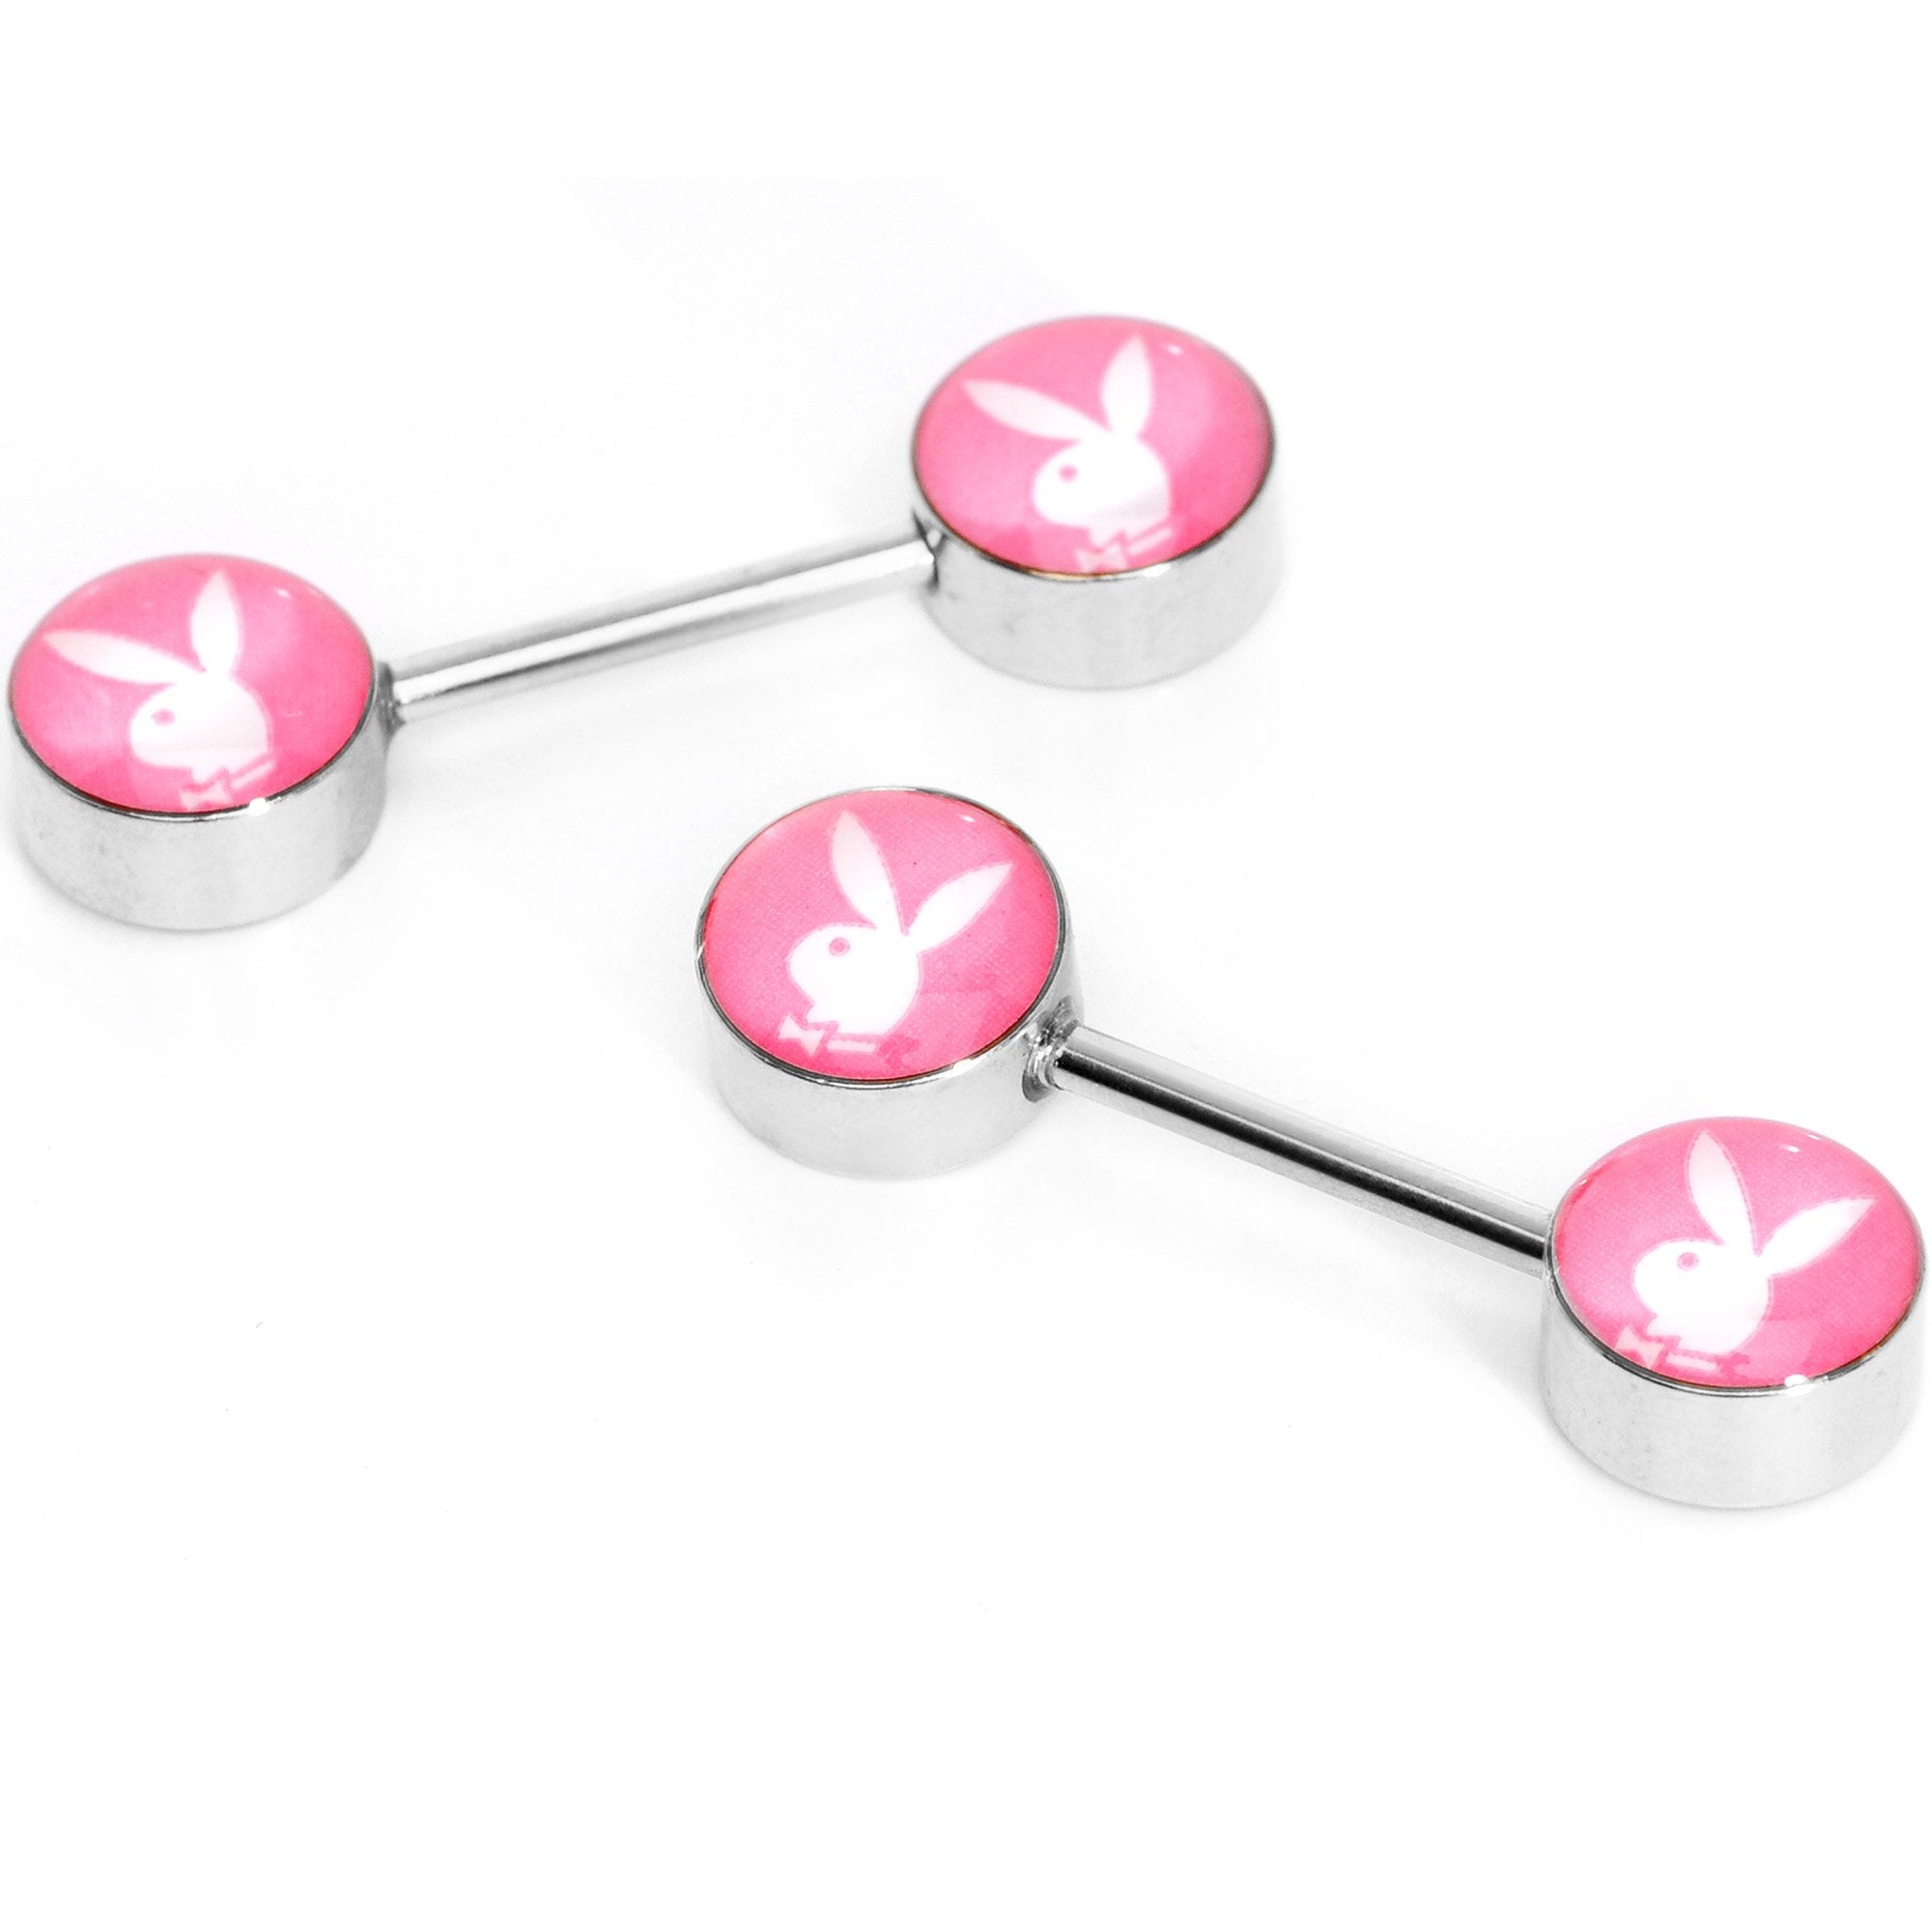 Licensed Pink White Playboy Bunny Barbell Nipple Ring Set